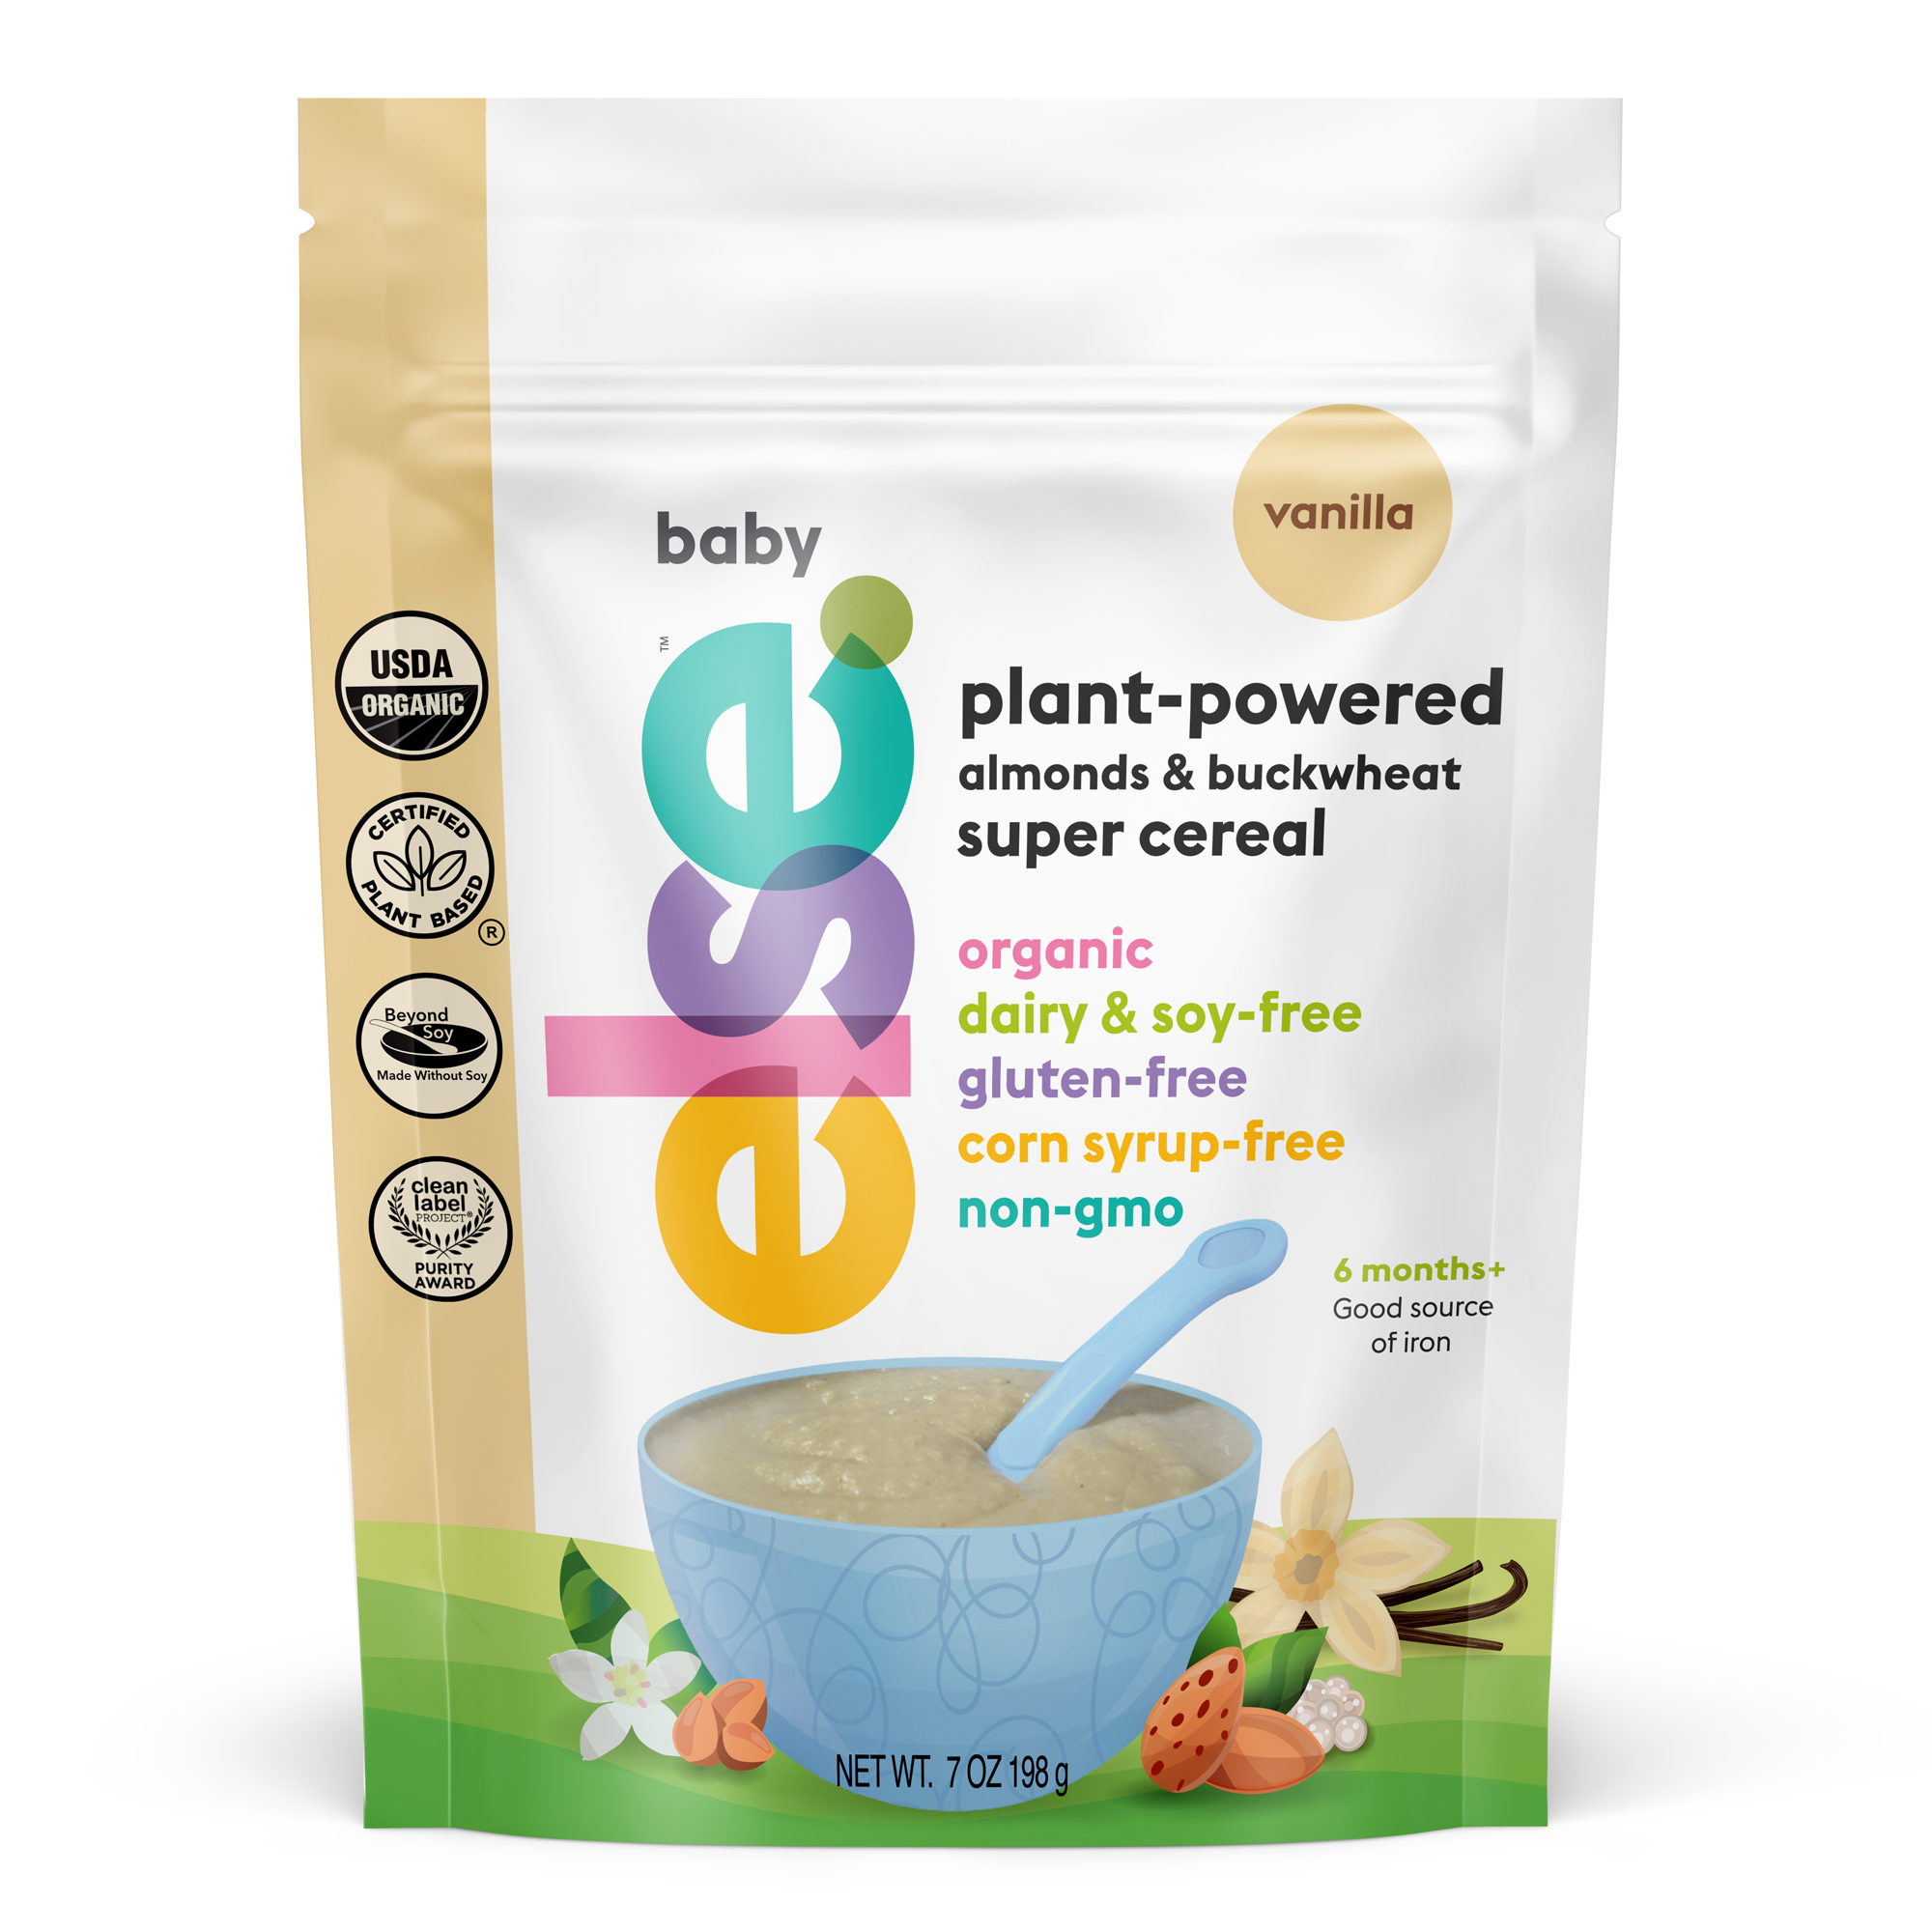 Else Nutrition Baby Plant-Powered Almonds & Buckwheat Super Cereal, Vanilla 12 units per case 7.0 oz